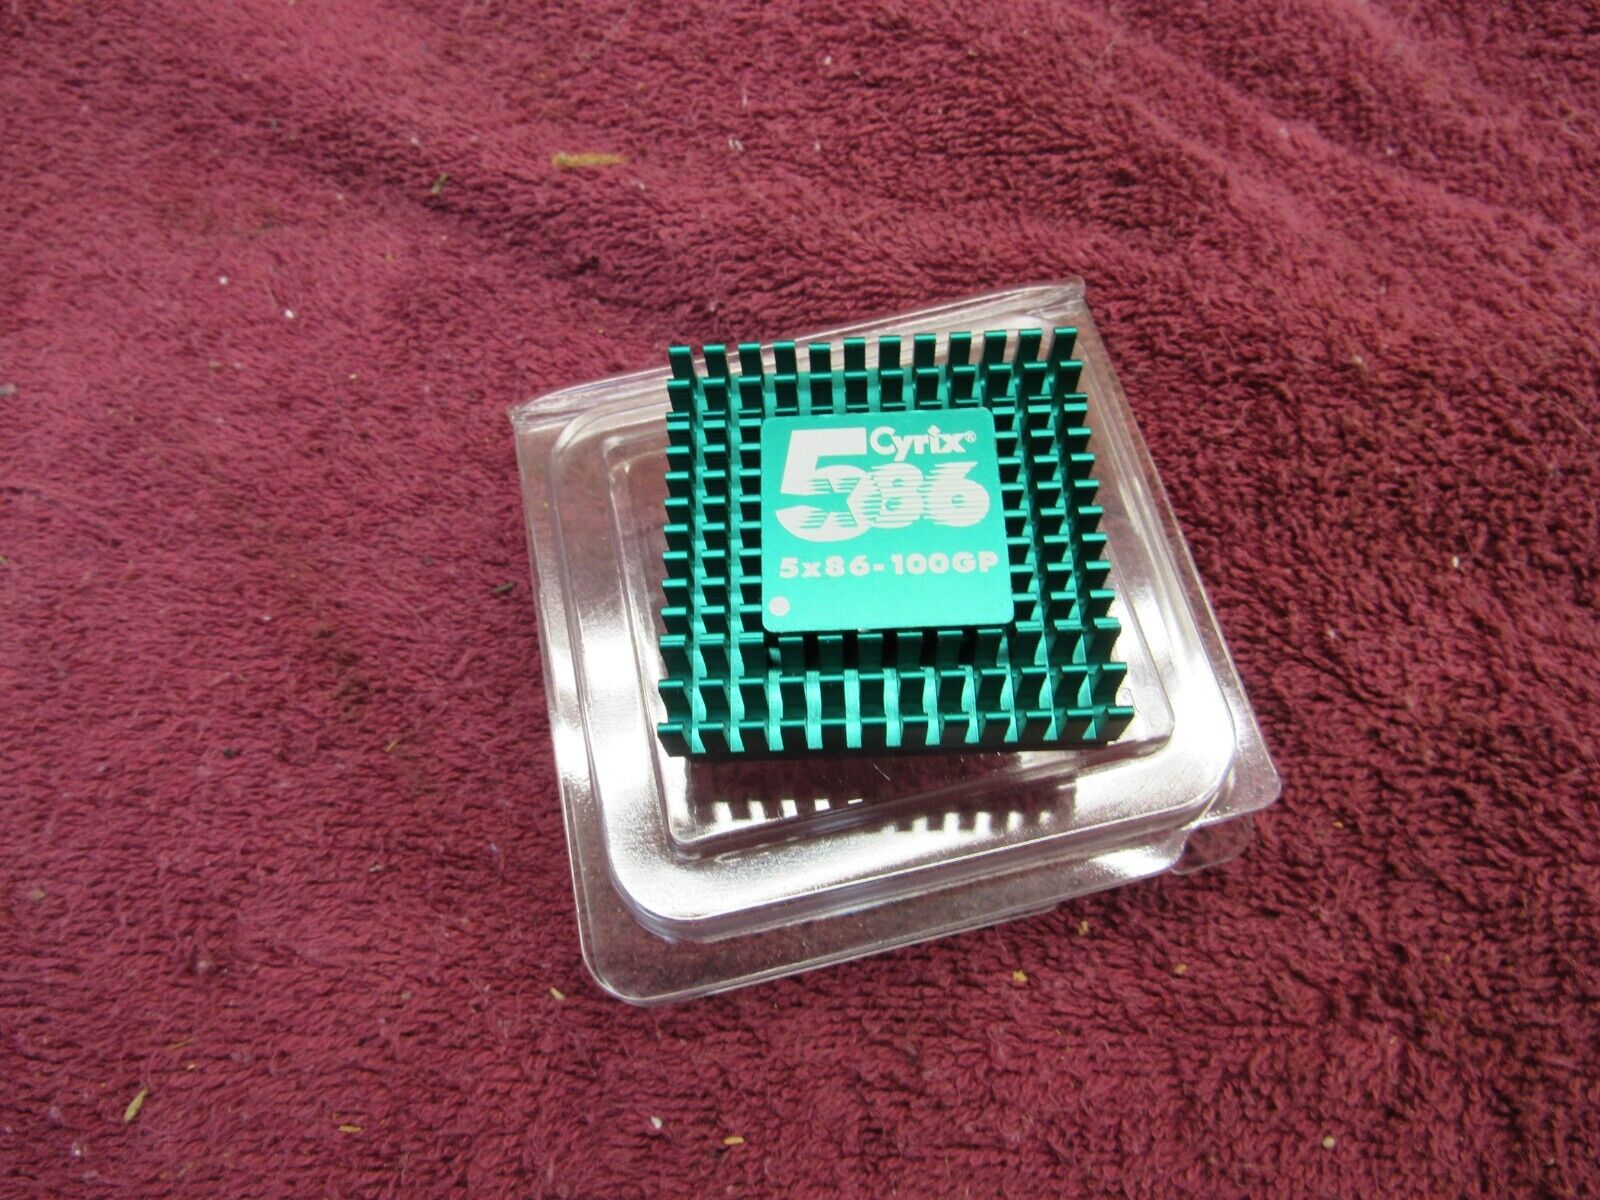 CERAMIC COLLECTABLE CYRIX 586 5X86-100GP PROCESSOR CPU VINTAGE GOLD RECOVERY